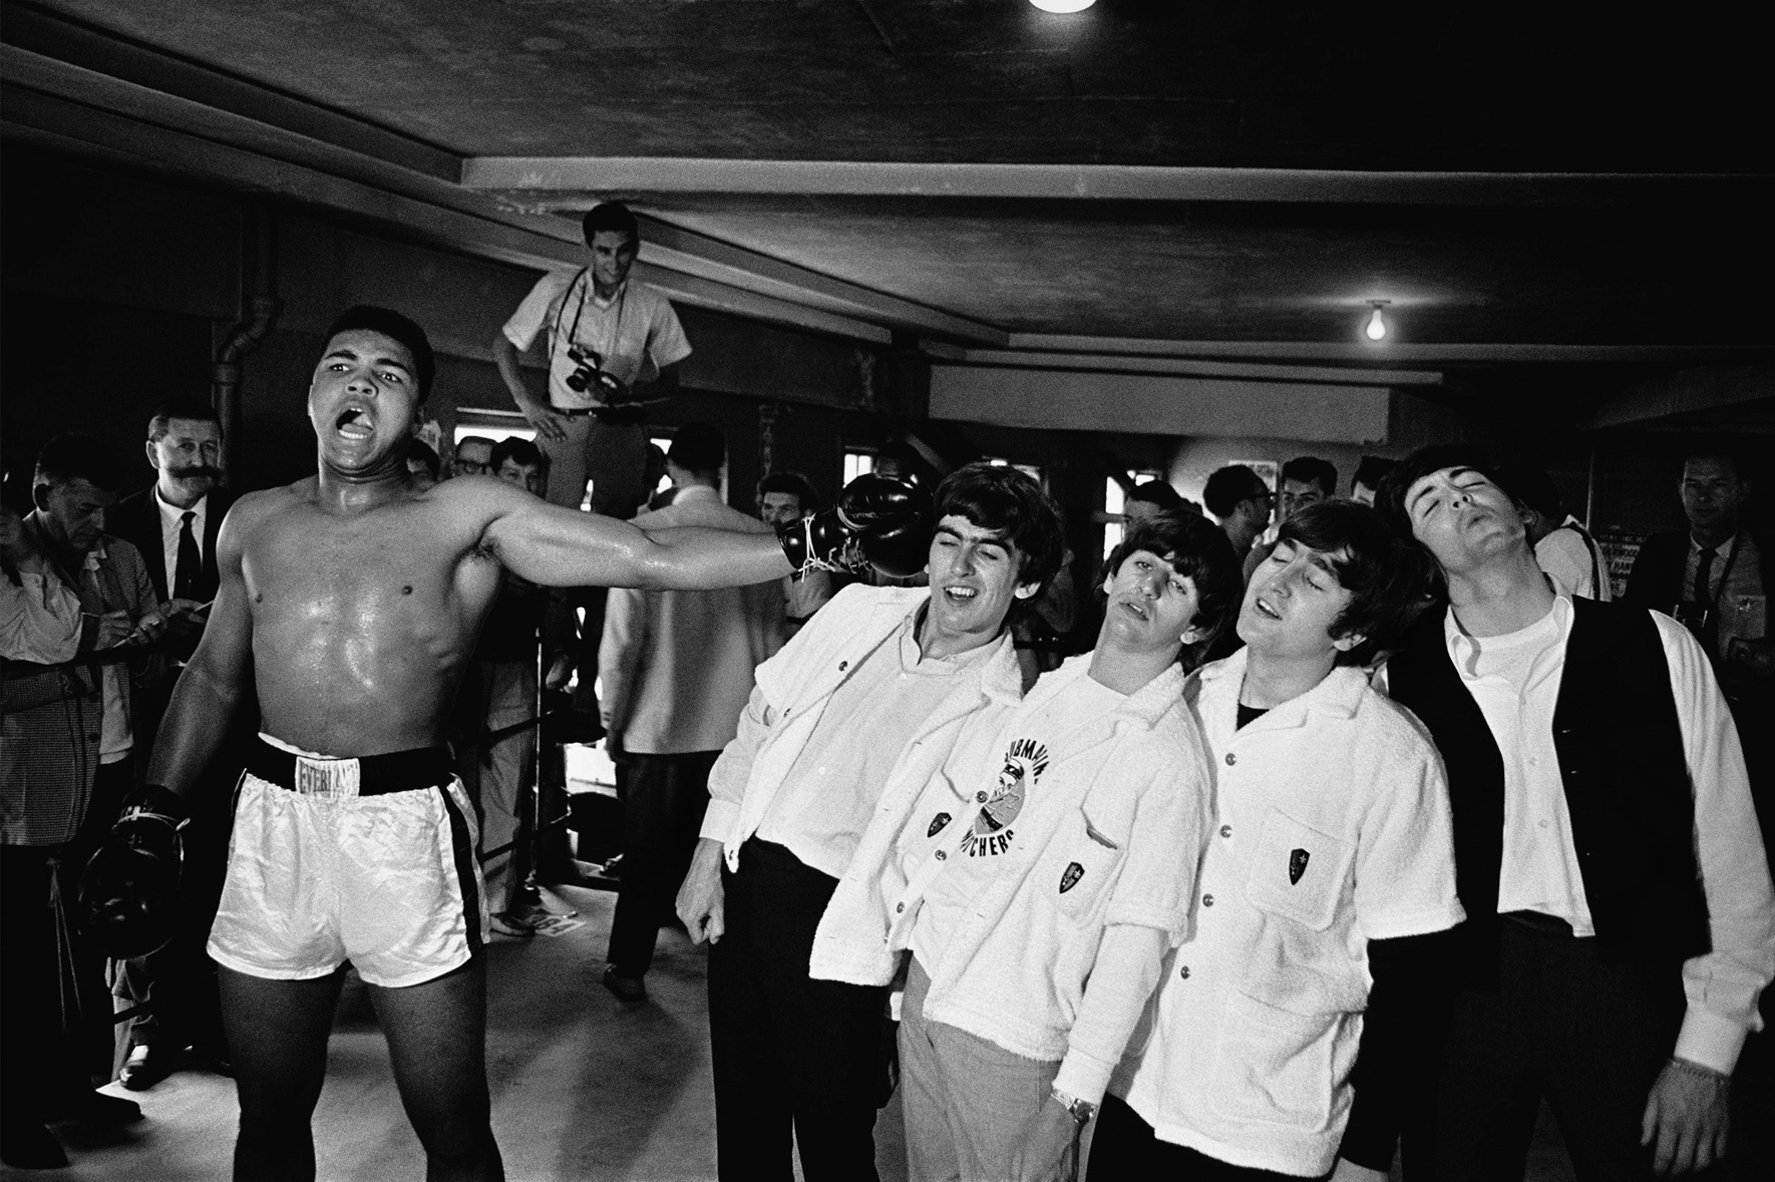 The Beatles, posed comically with ascendant heavyweight boxing contender Cassius Clay during their brief first tour of the United States in February 1964. Days later, Clay defeated Sonny Liston to claim the world’s heavyweight championship. Clay subsequently publicized that he had joined the Nation of Islam and changed his name to Muhammad Ali.